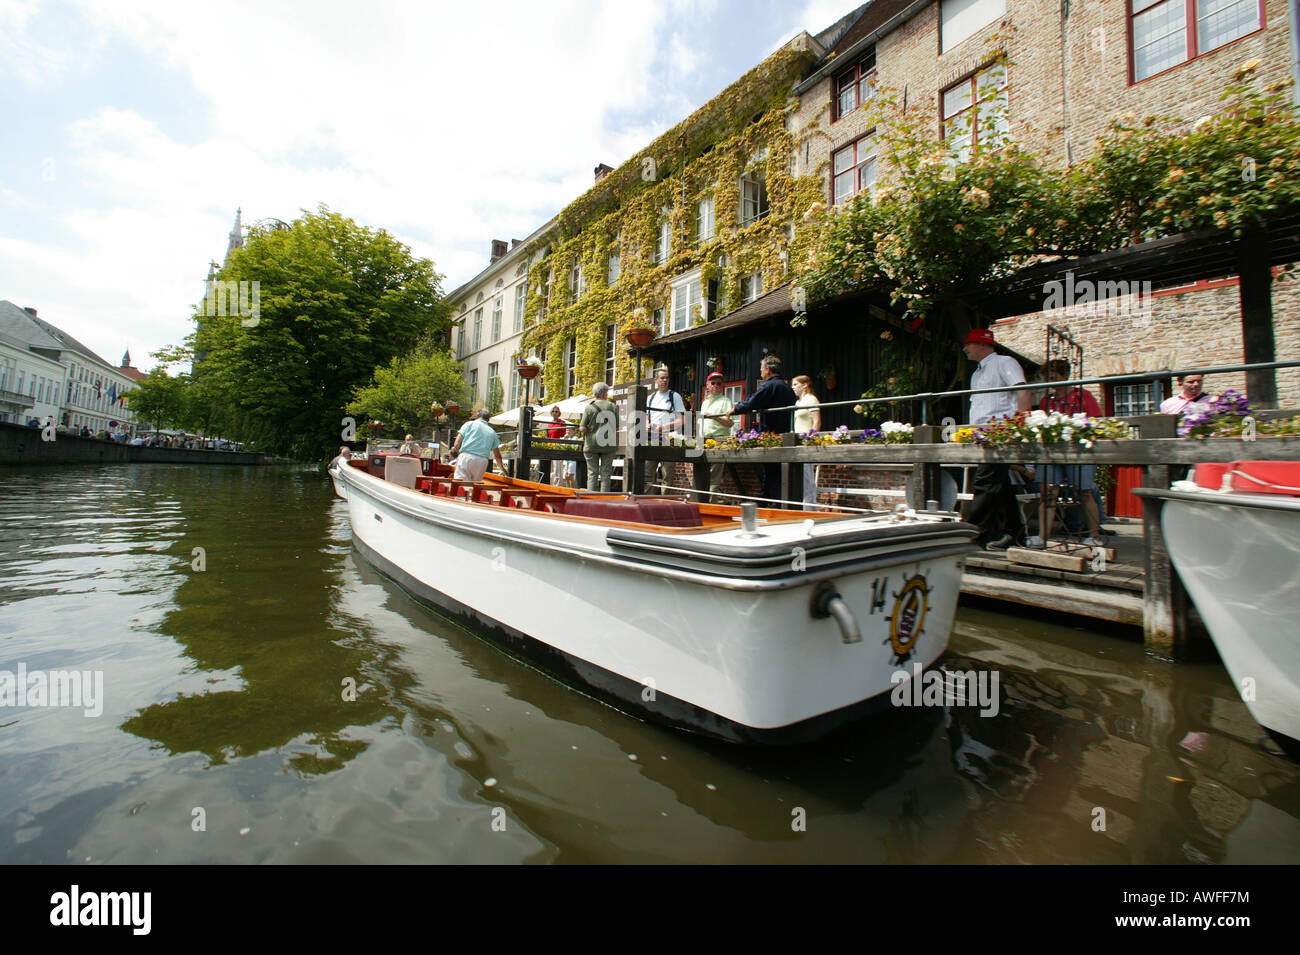 Tourist boat in the canal, Bruges, Flanders, Belgium, Europe Stock Photo